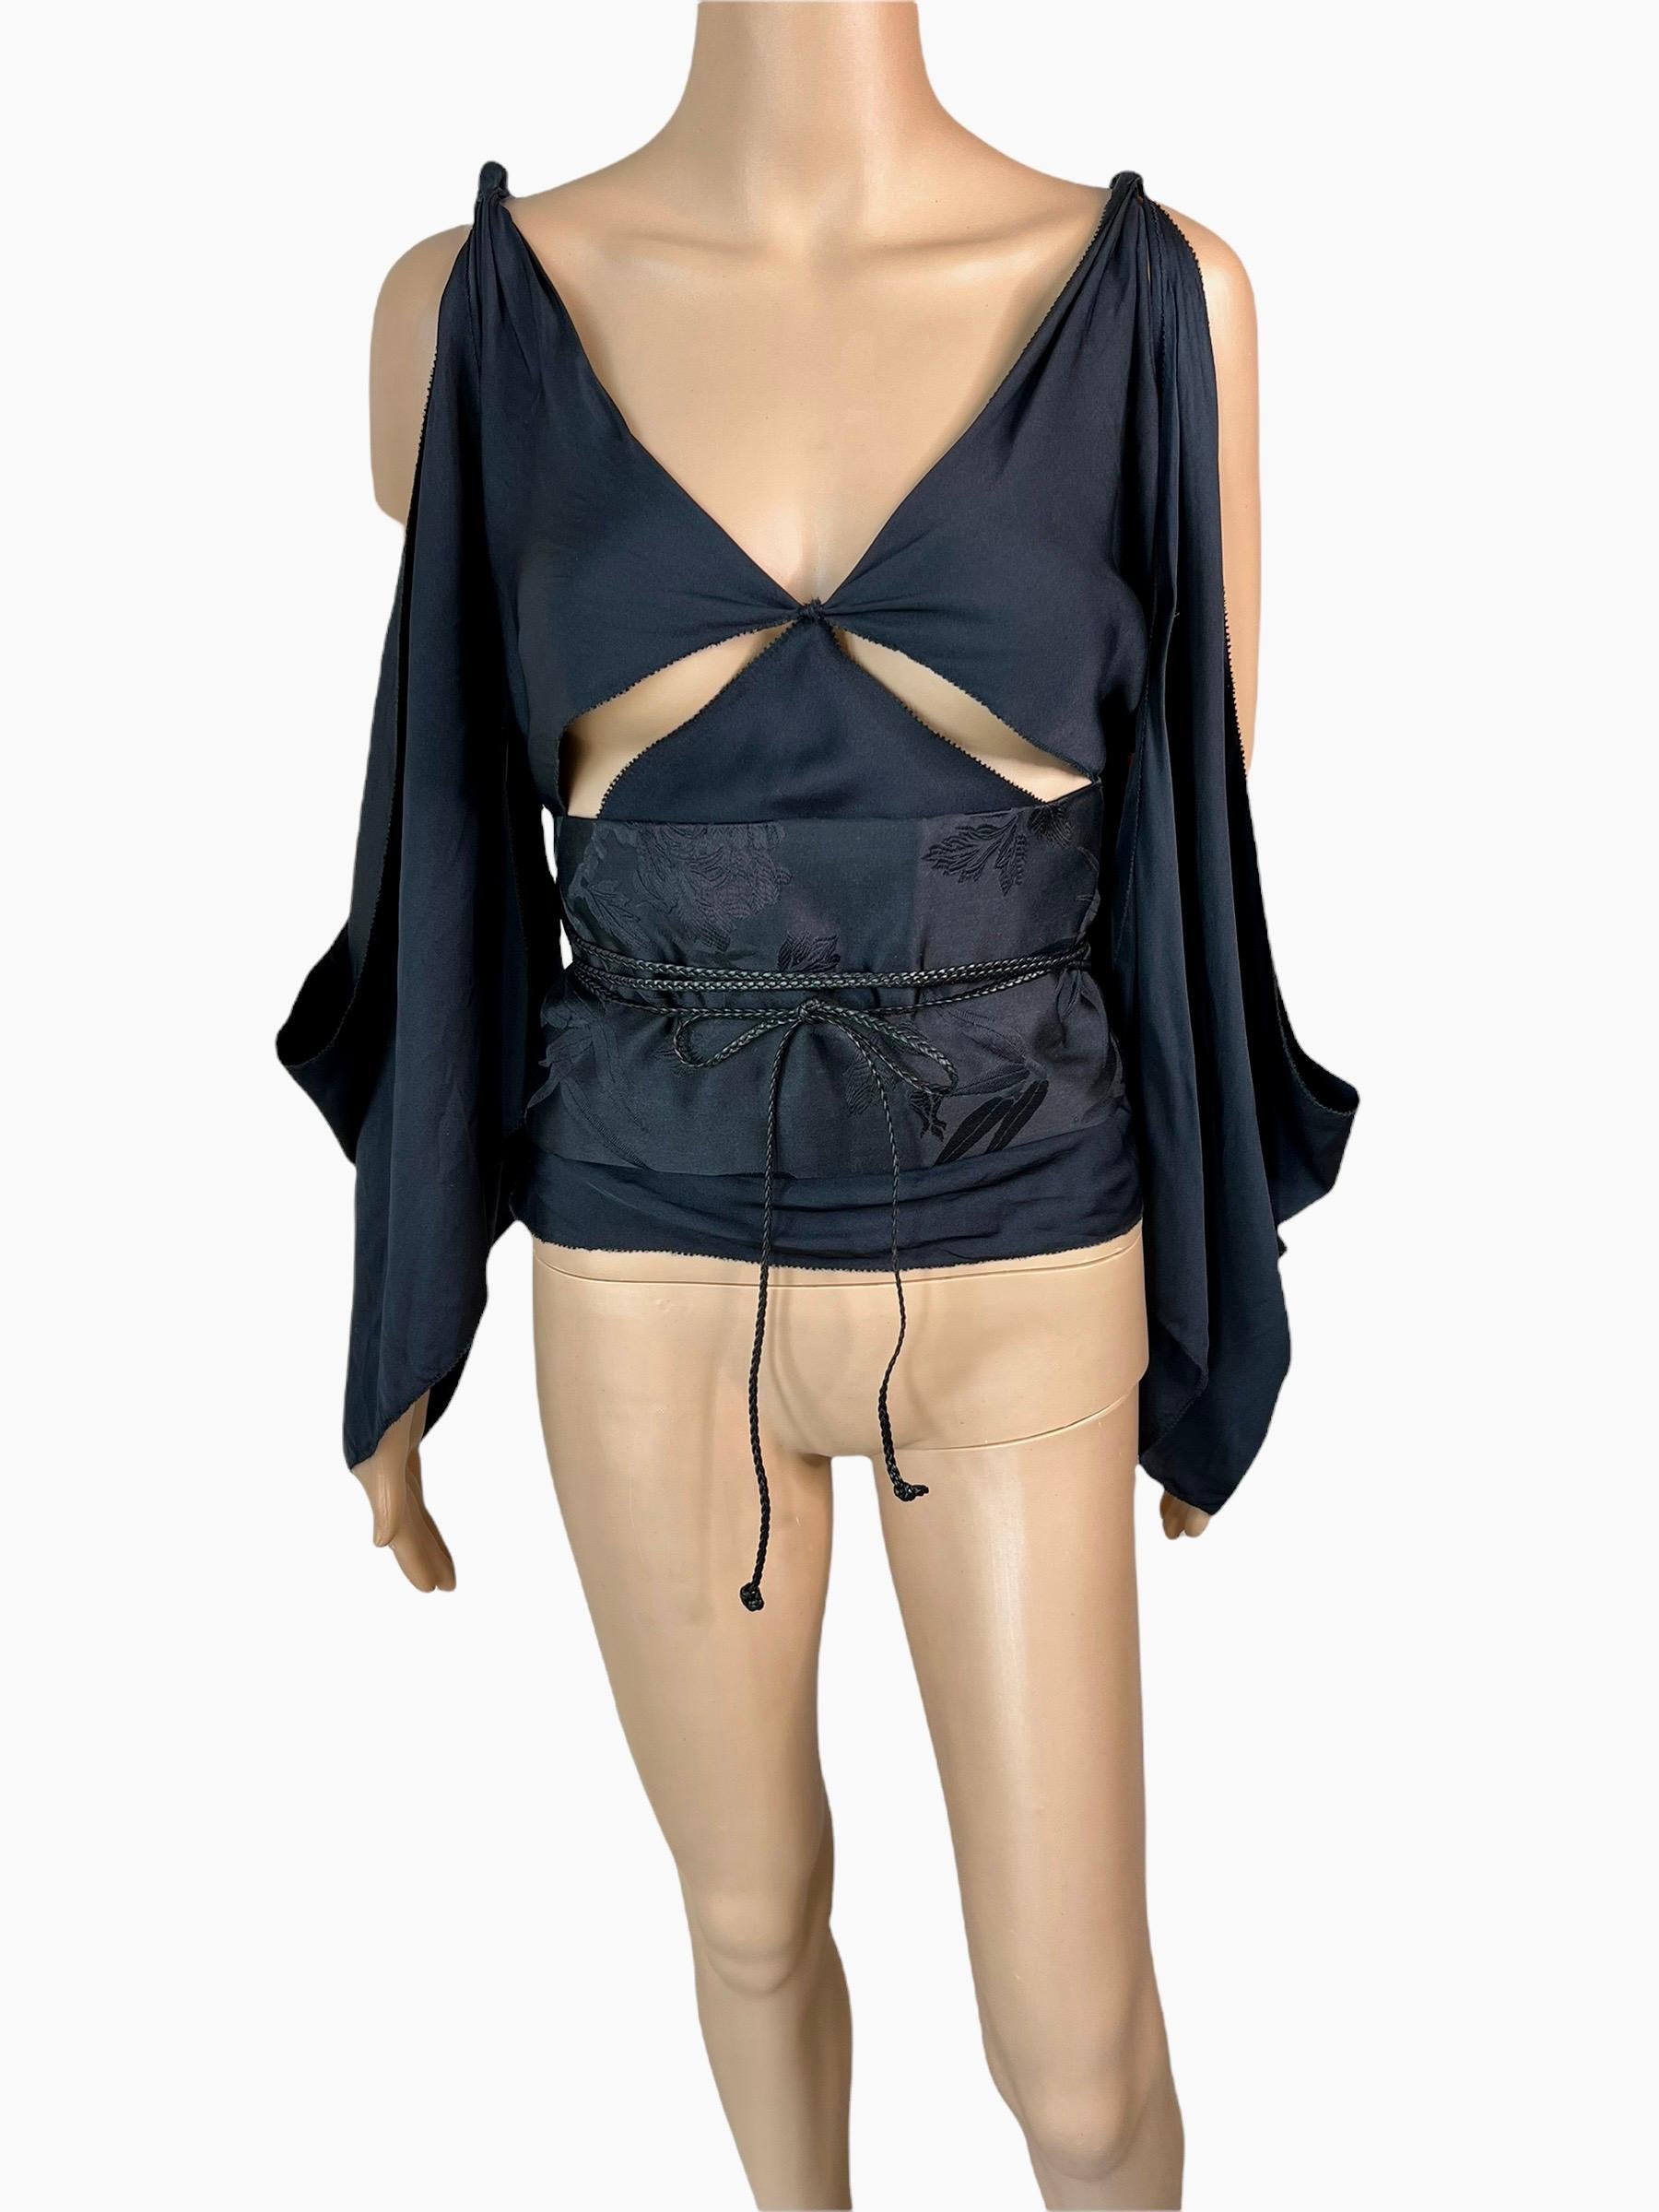 Tom Ford for Gucci F/W 2002 Runway Cutout Backless Silk Black Belted Blouse Top In Good Condition For Sale In Naples, FL